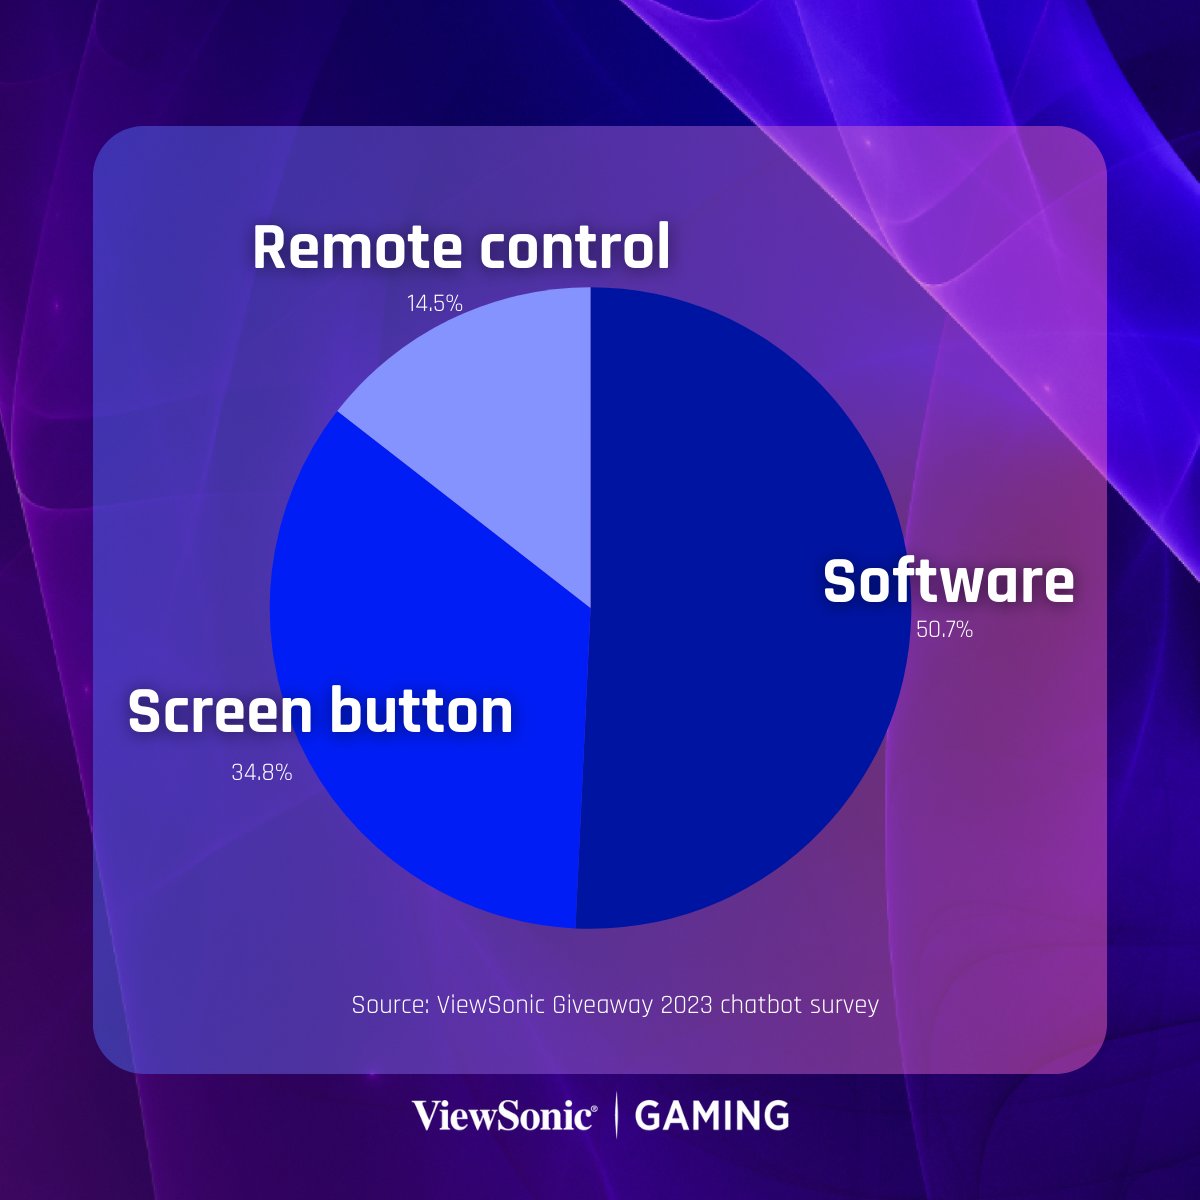 Discover how gamers fine-tune their gaming view to get the most out of their games in our latest survey. What's your go-to adjustment for achieving gaming perfection? 🔍 📋 Insights based on 430 responses from our 2023 Giveaway Survey. #ViewSonic #ViewSonicGaming #Gamers